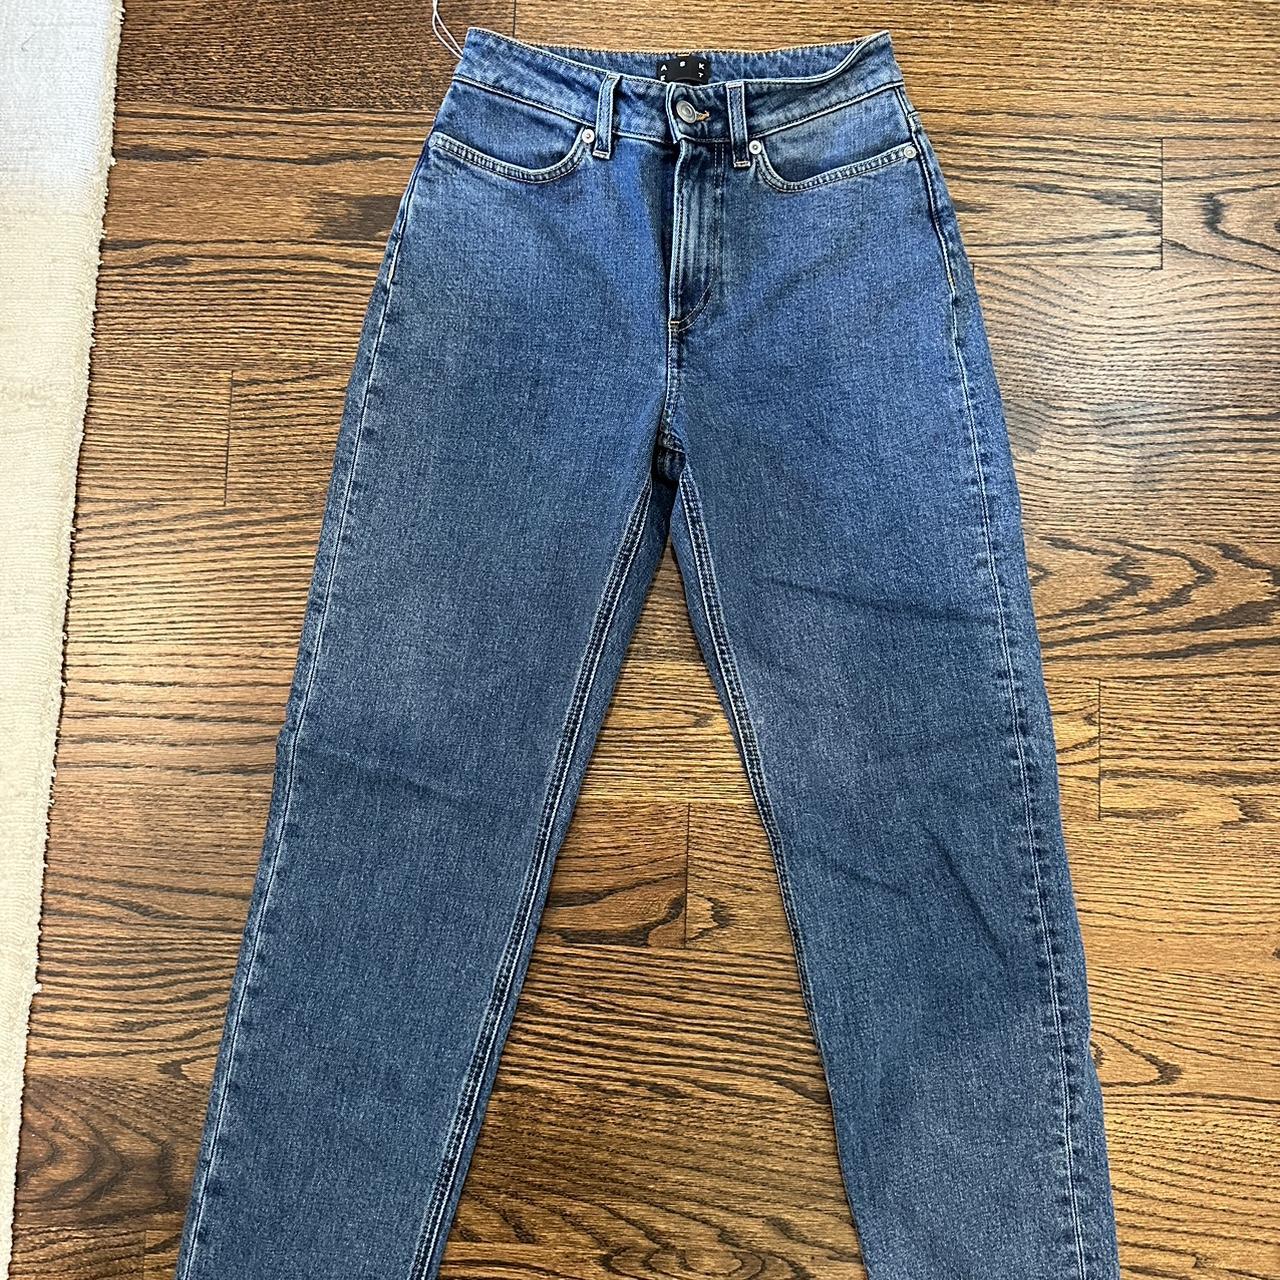 ASKET Jeans “The Standard Jeans” in Stone Wash,... - Depop